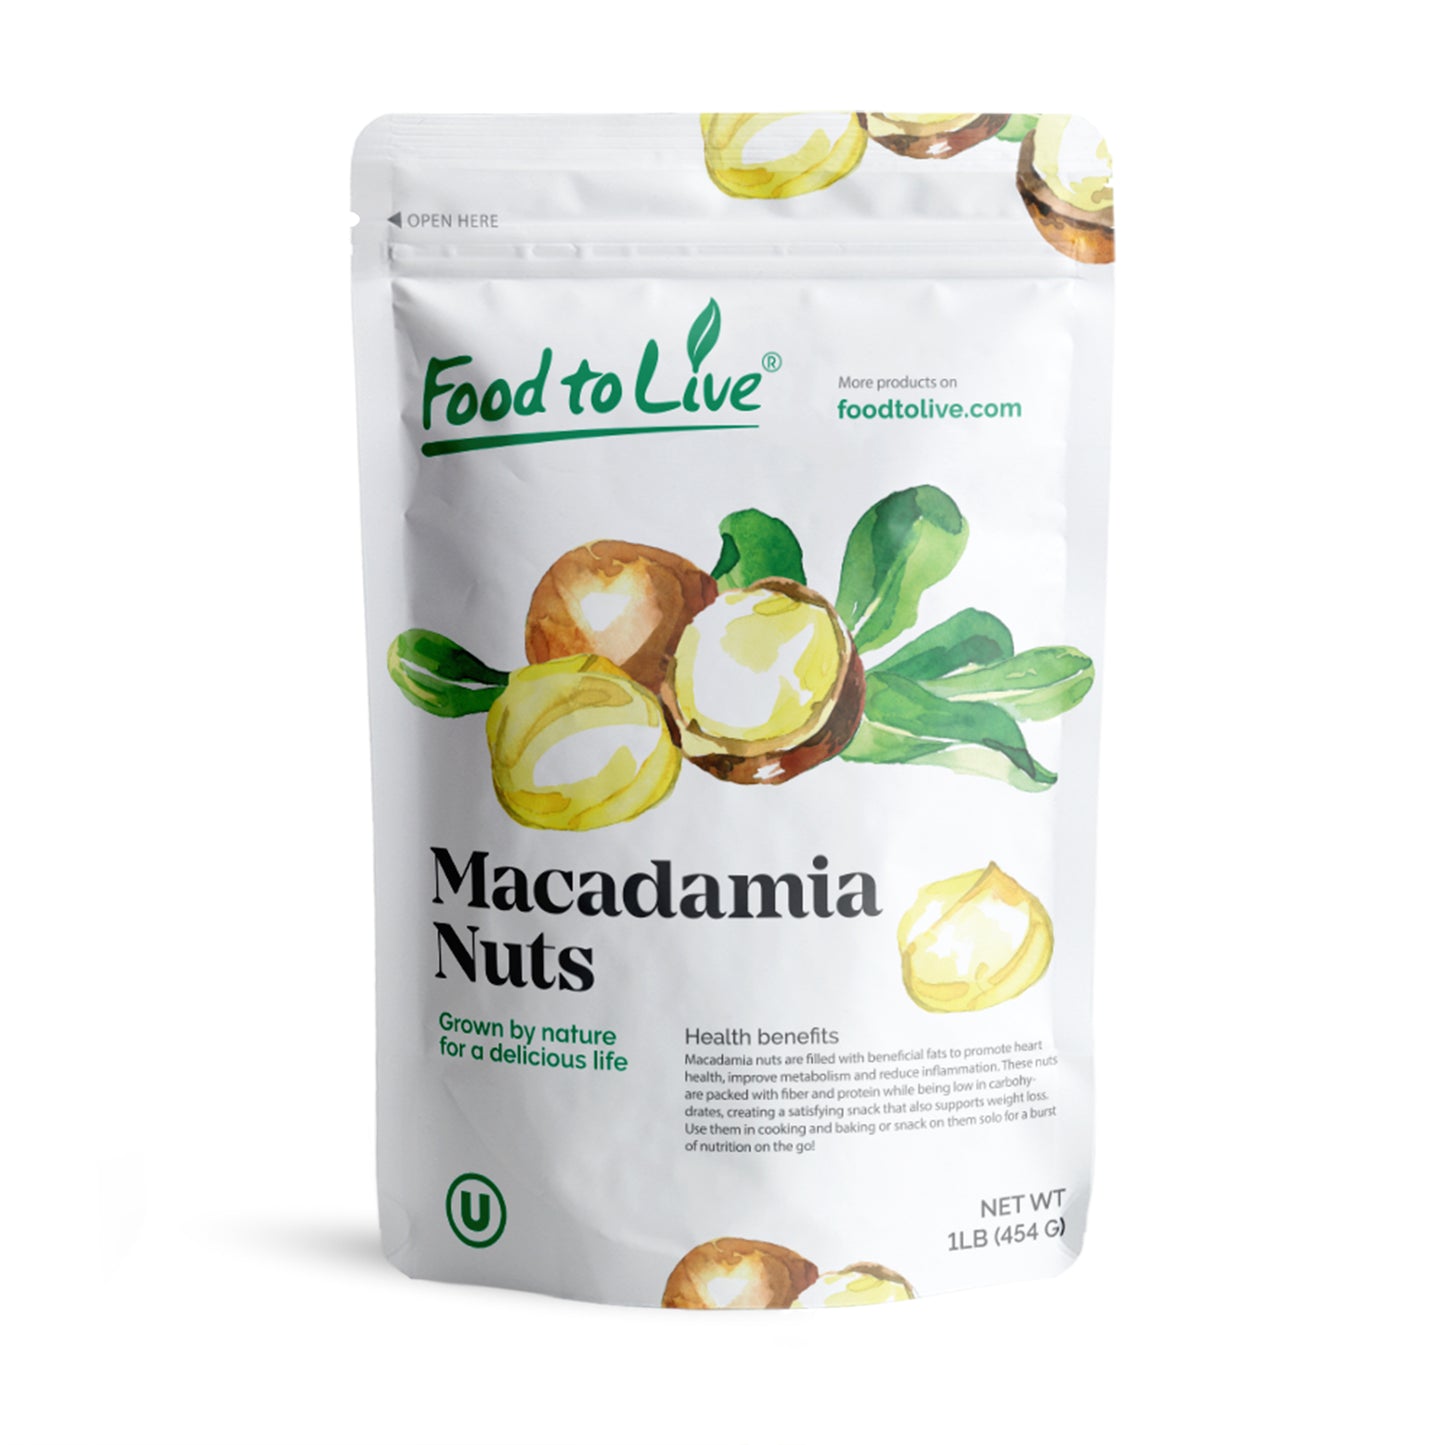 Macadamia Nut Pieces - Raw, Unsalted, Unroasted, Keto Friendly, Kosher, Vegan, Bulk, Great as Snack and for Baking, Good Source of Manganese, Thiamin, and Copper